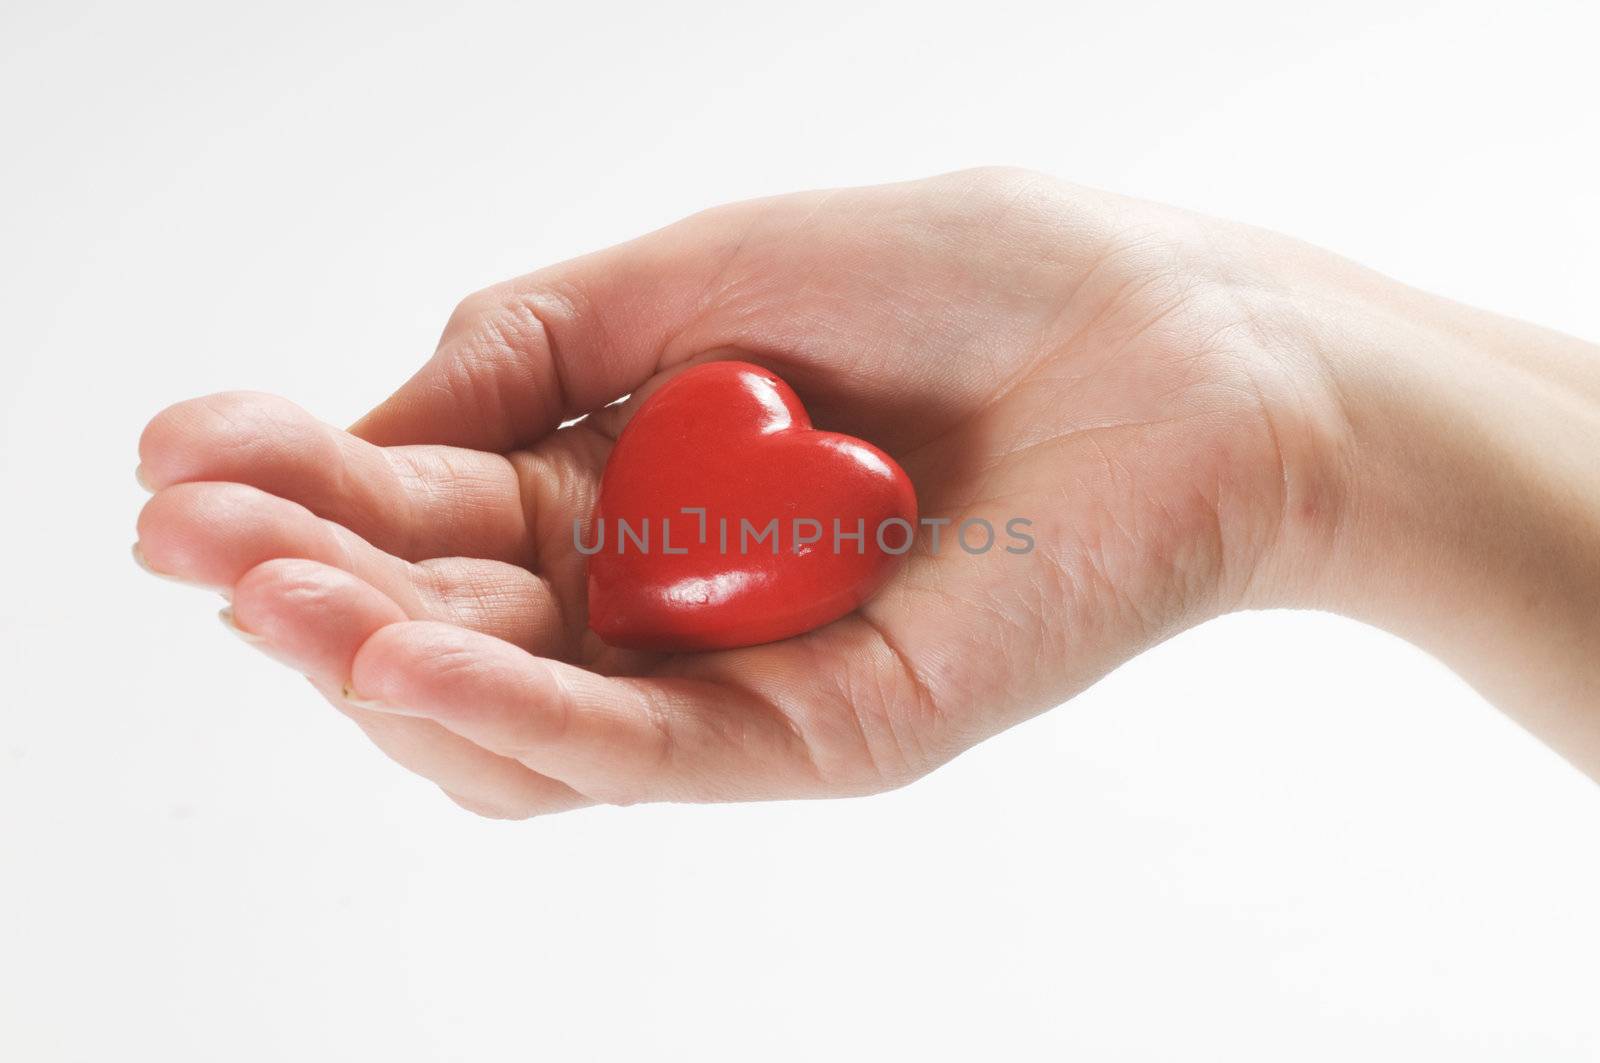 Heart in hand conceptual image. Love, care, health themes.